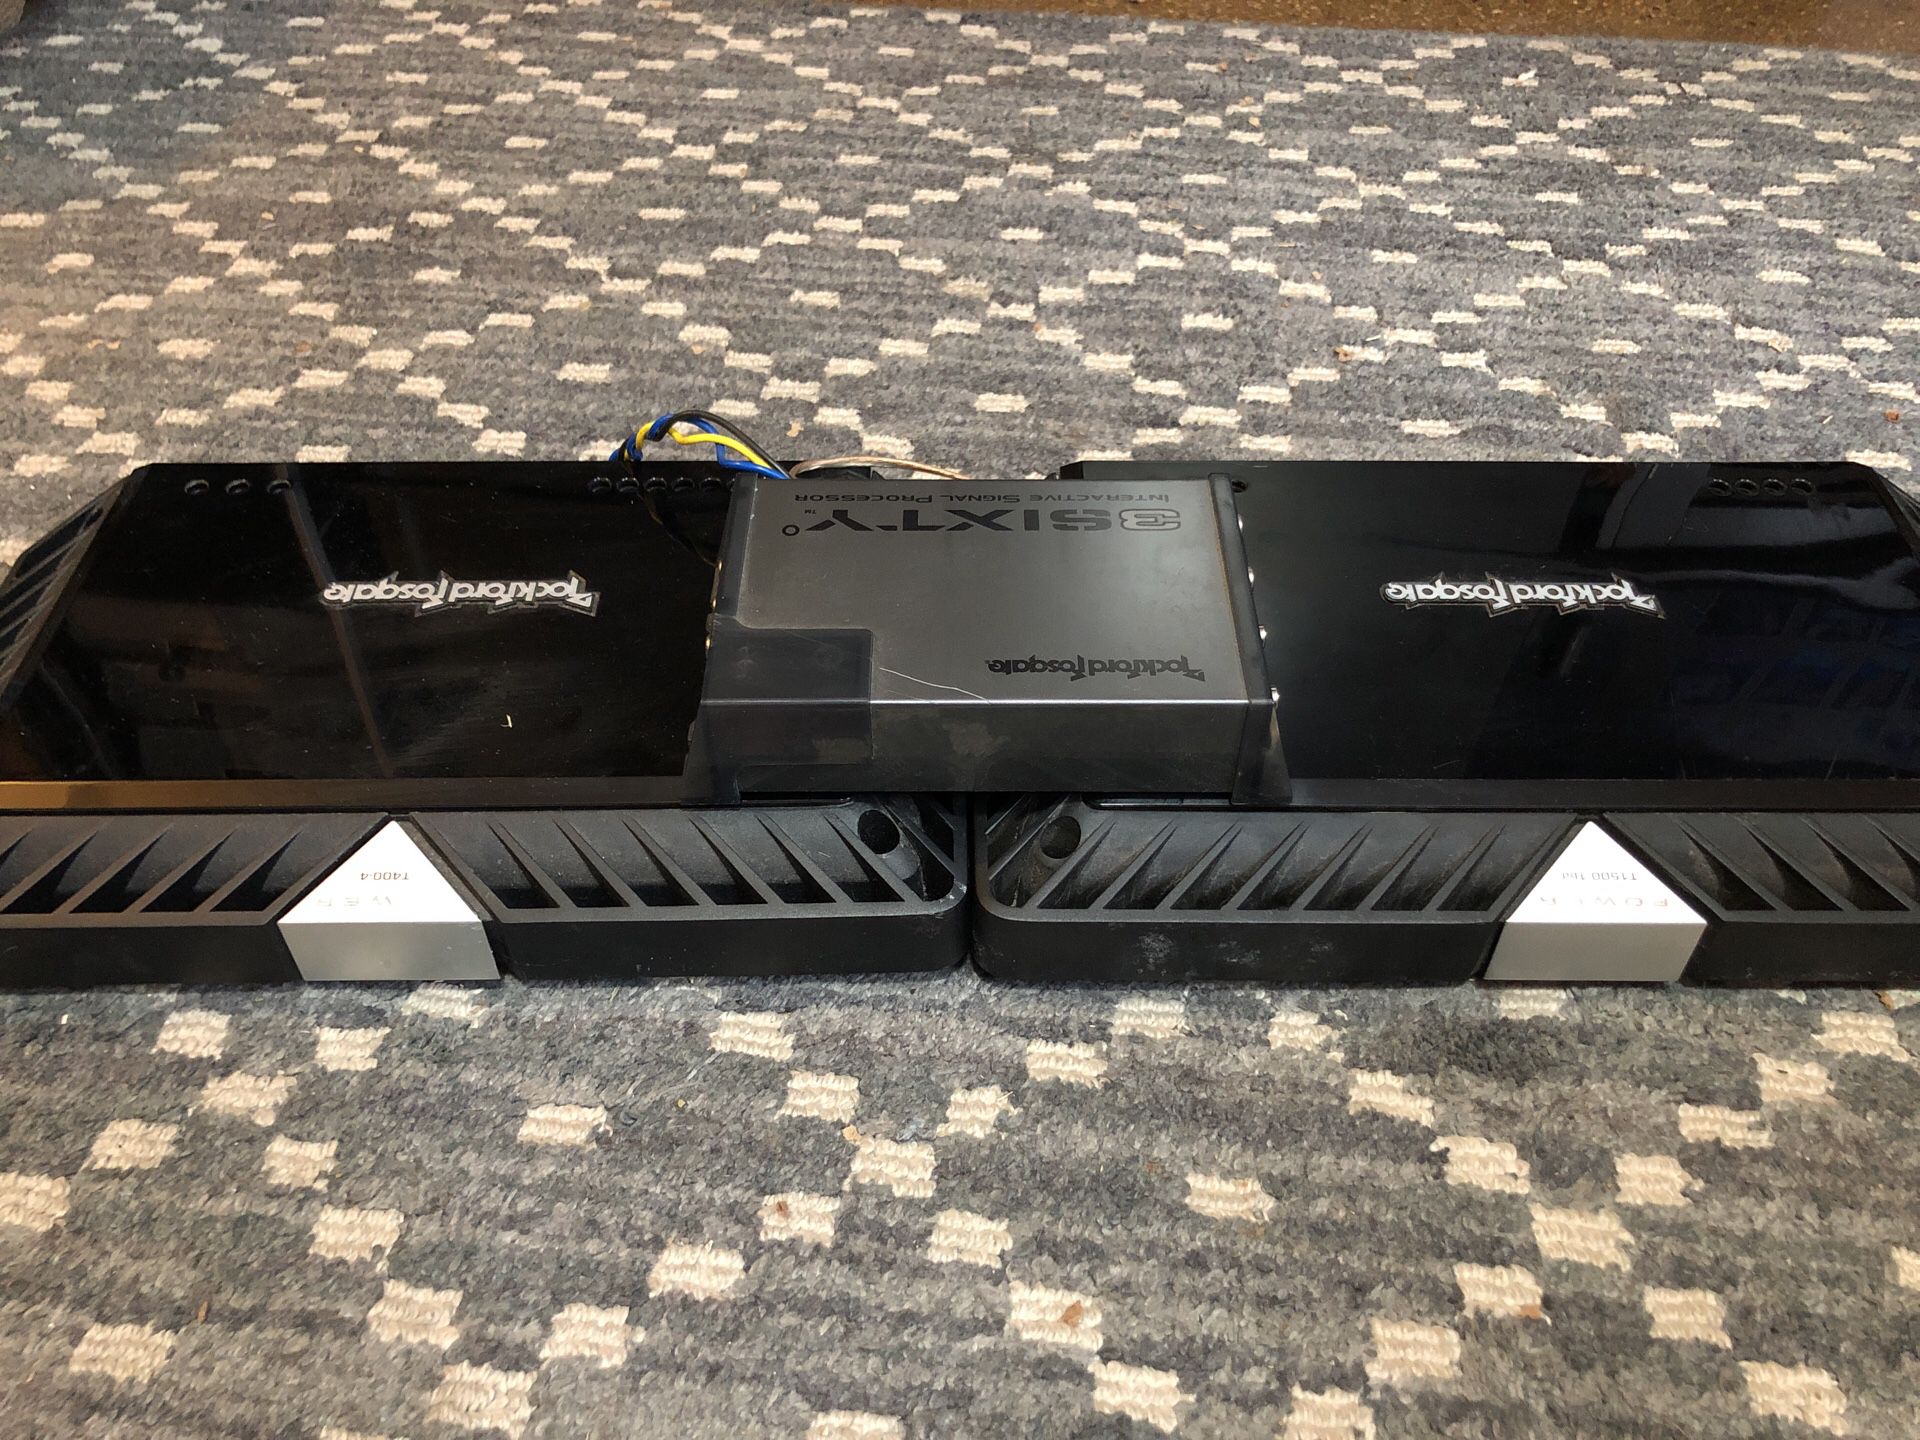 Rockford Fosgate amplifiers and interactive signal processor